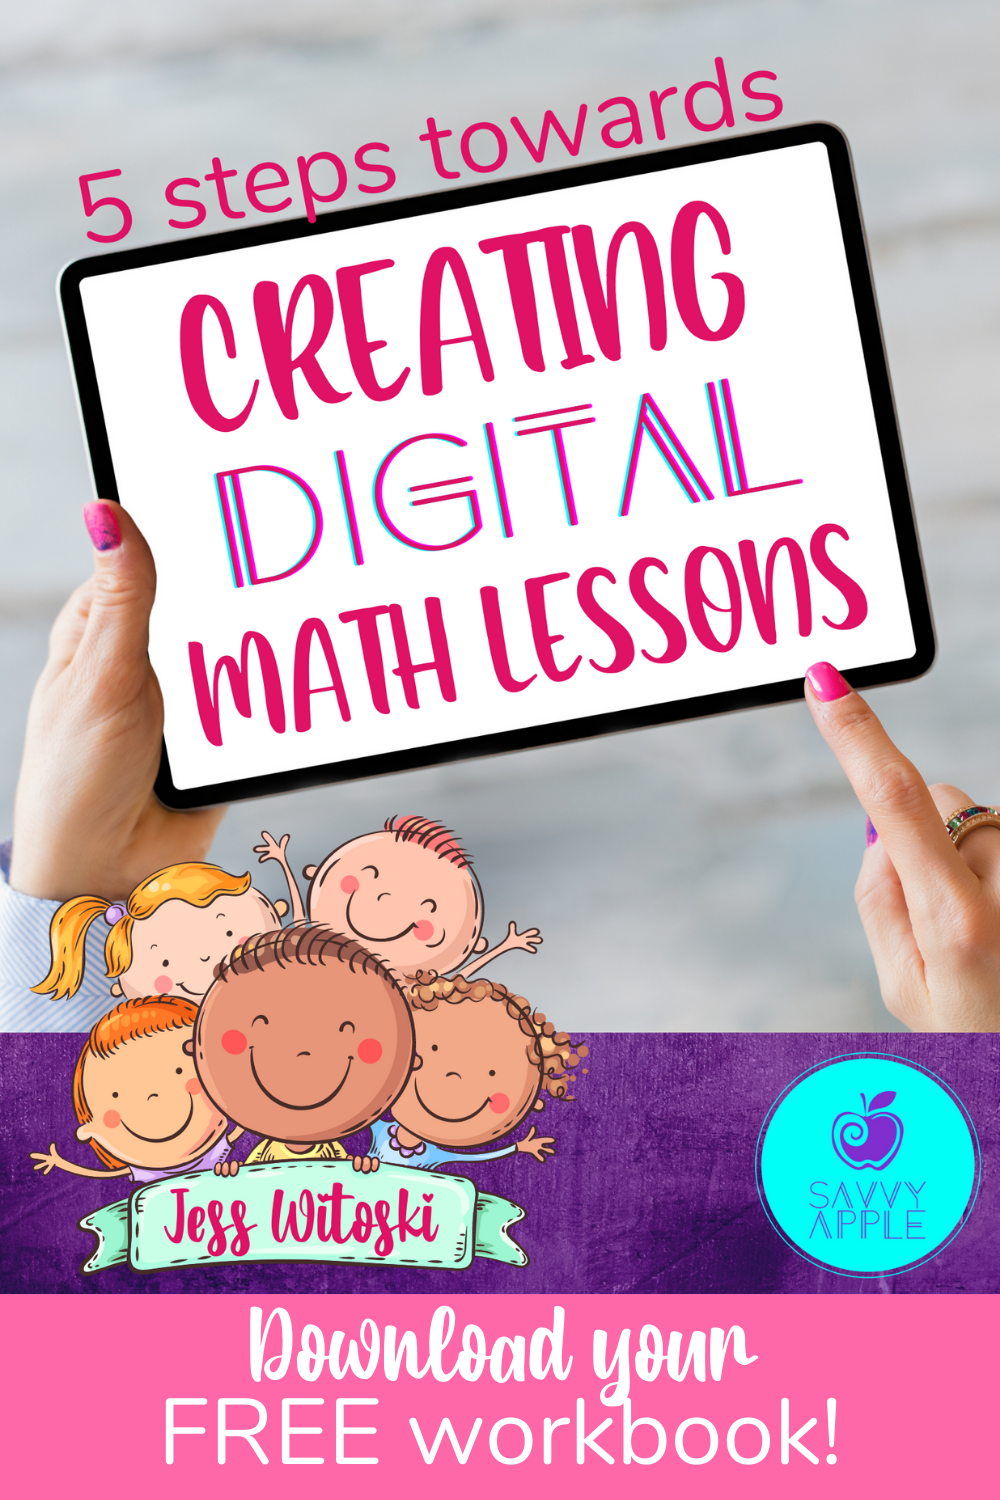 5 steps towards creating digital math lessons workbook by savvy apple